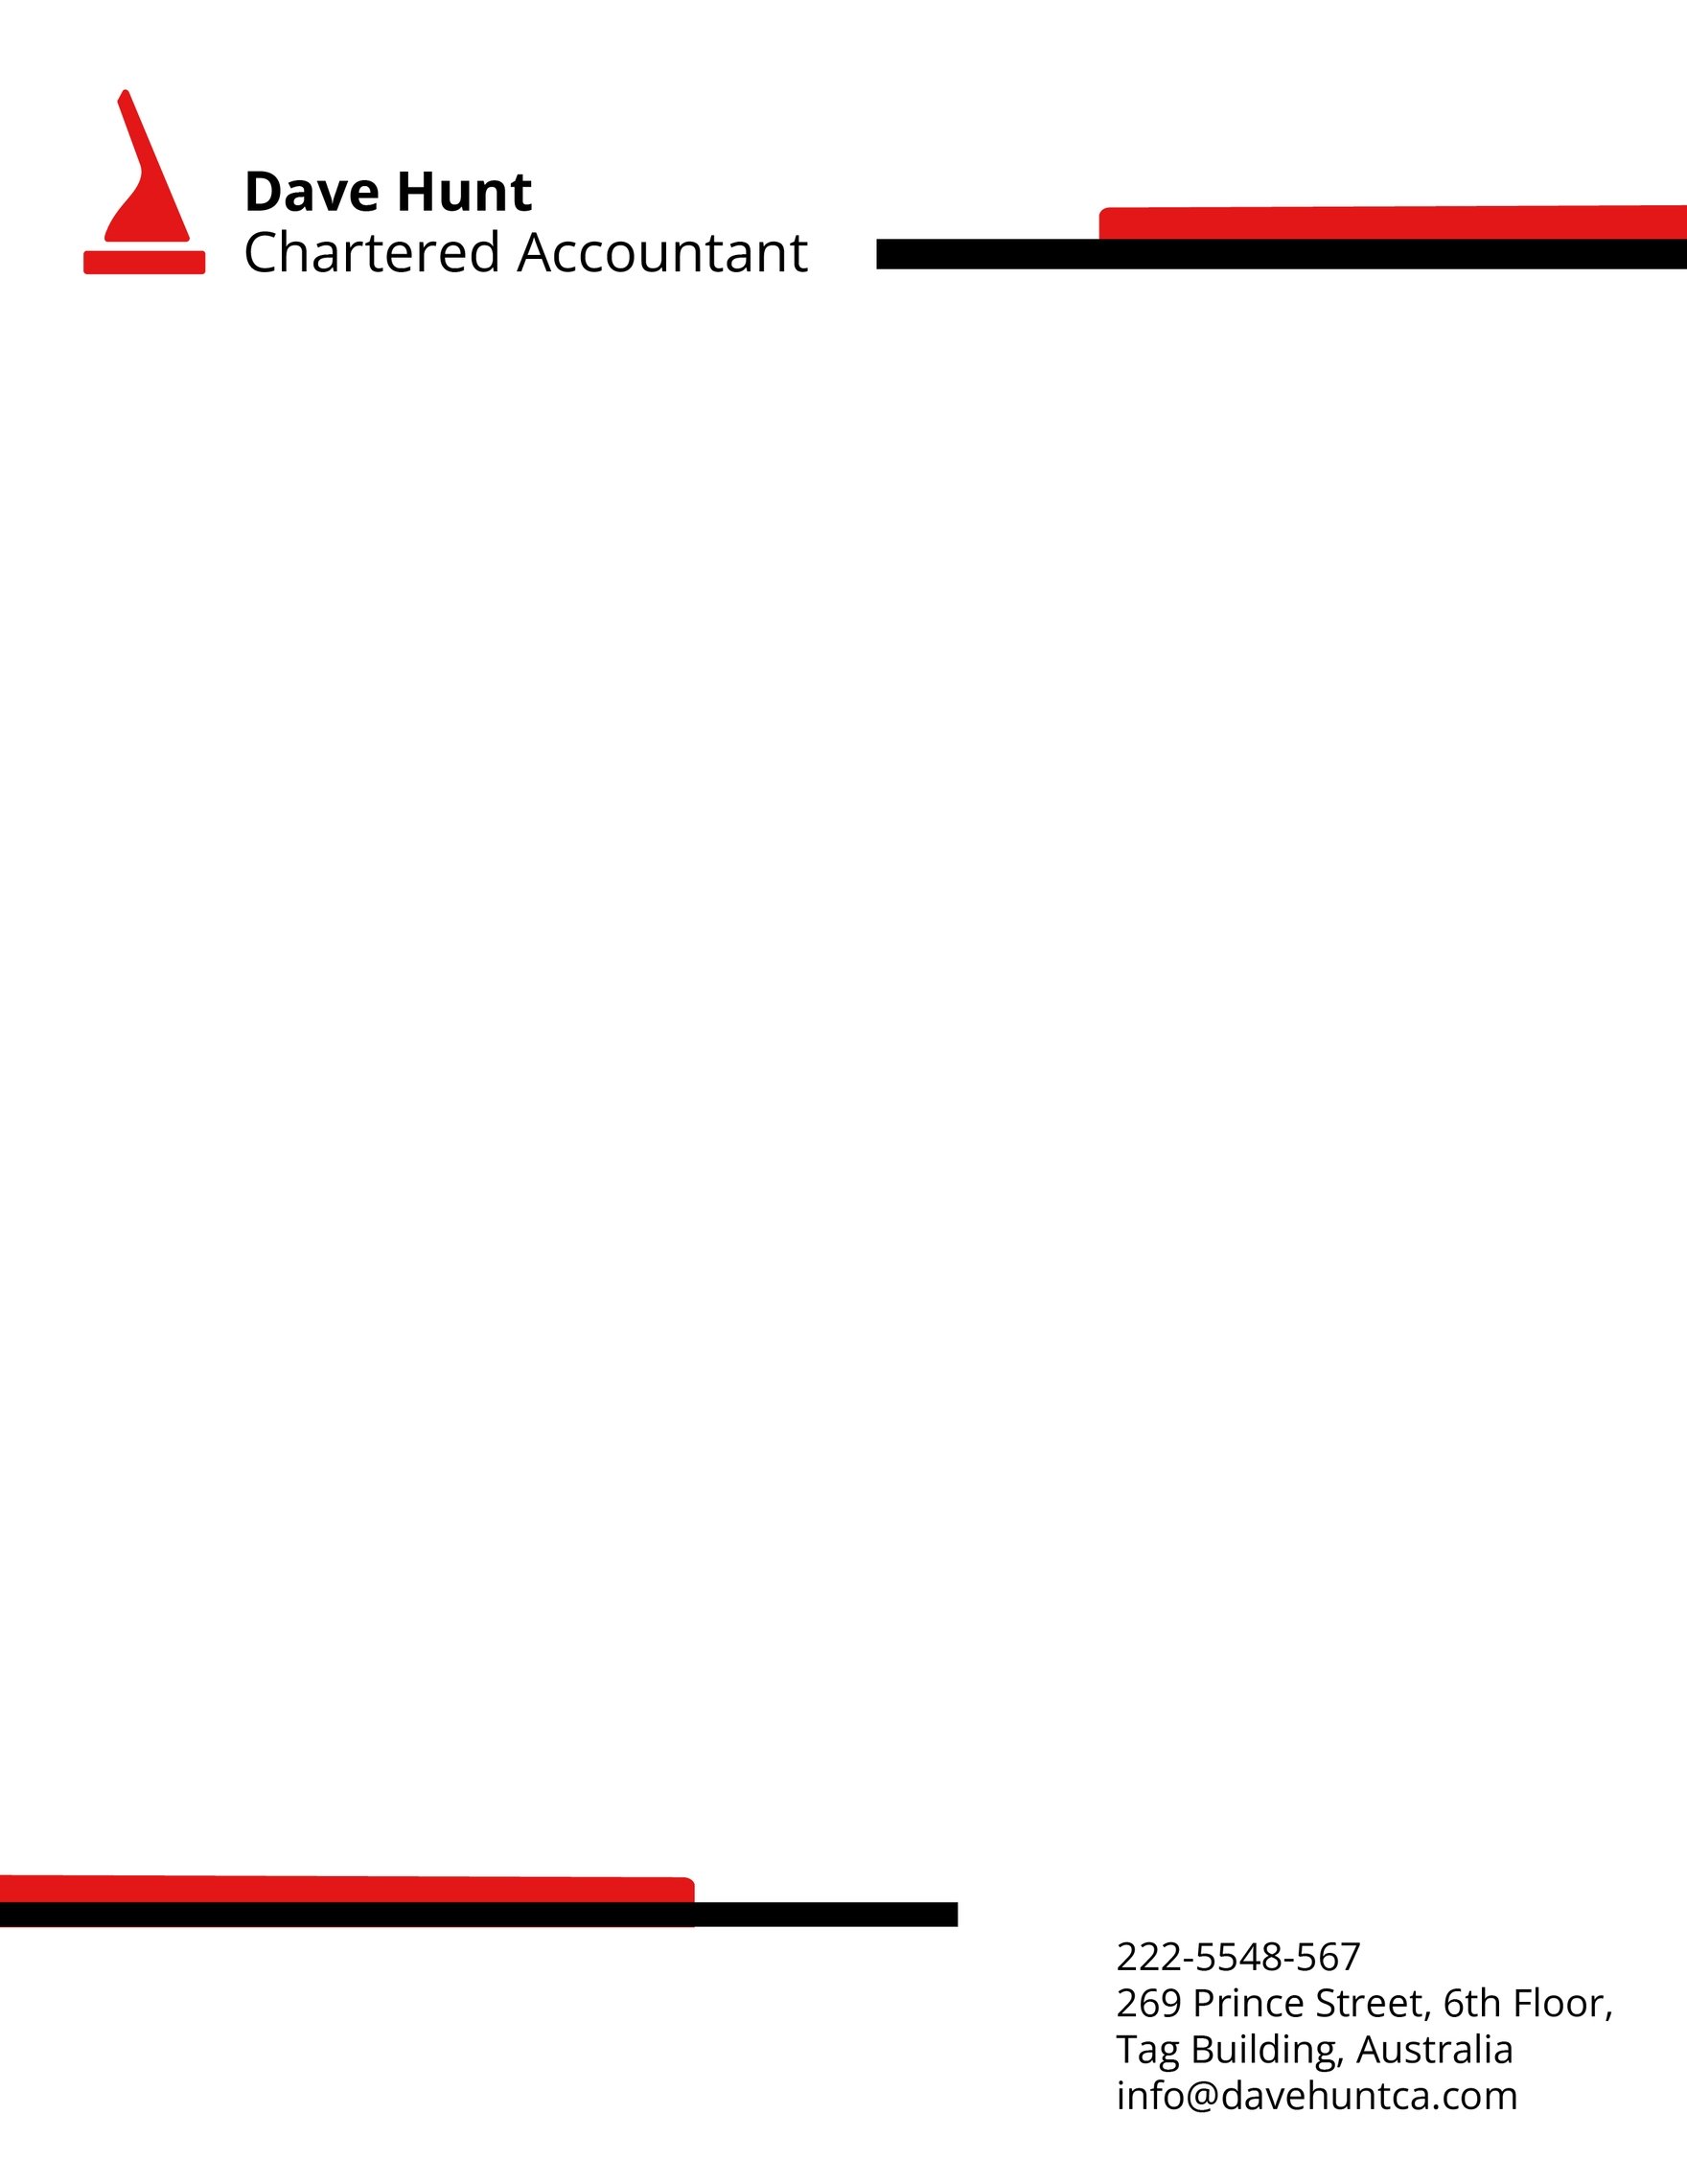 Official Chartered Accountant Letterhead Template in Illustrator